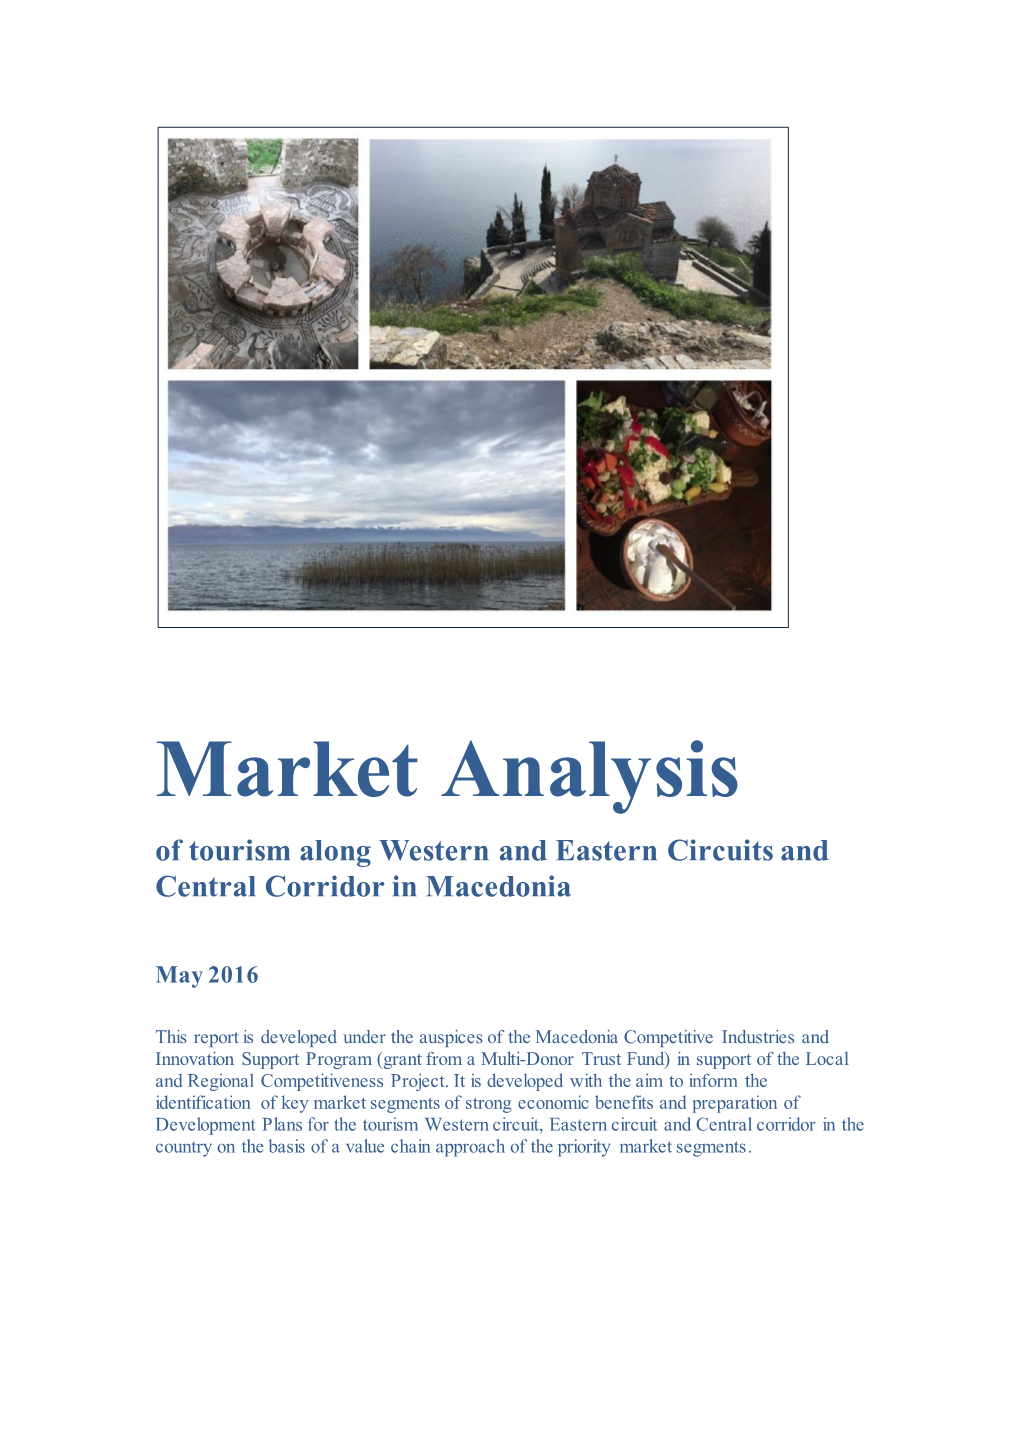 Market Analysis of Tourism Along Western and Eastern Circuits and Central Corridor in Macedonia